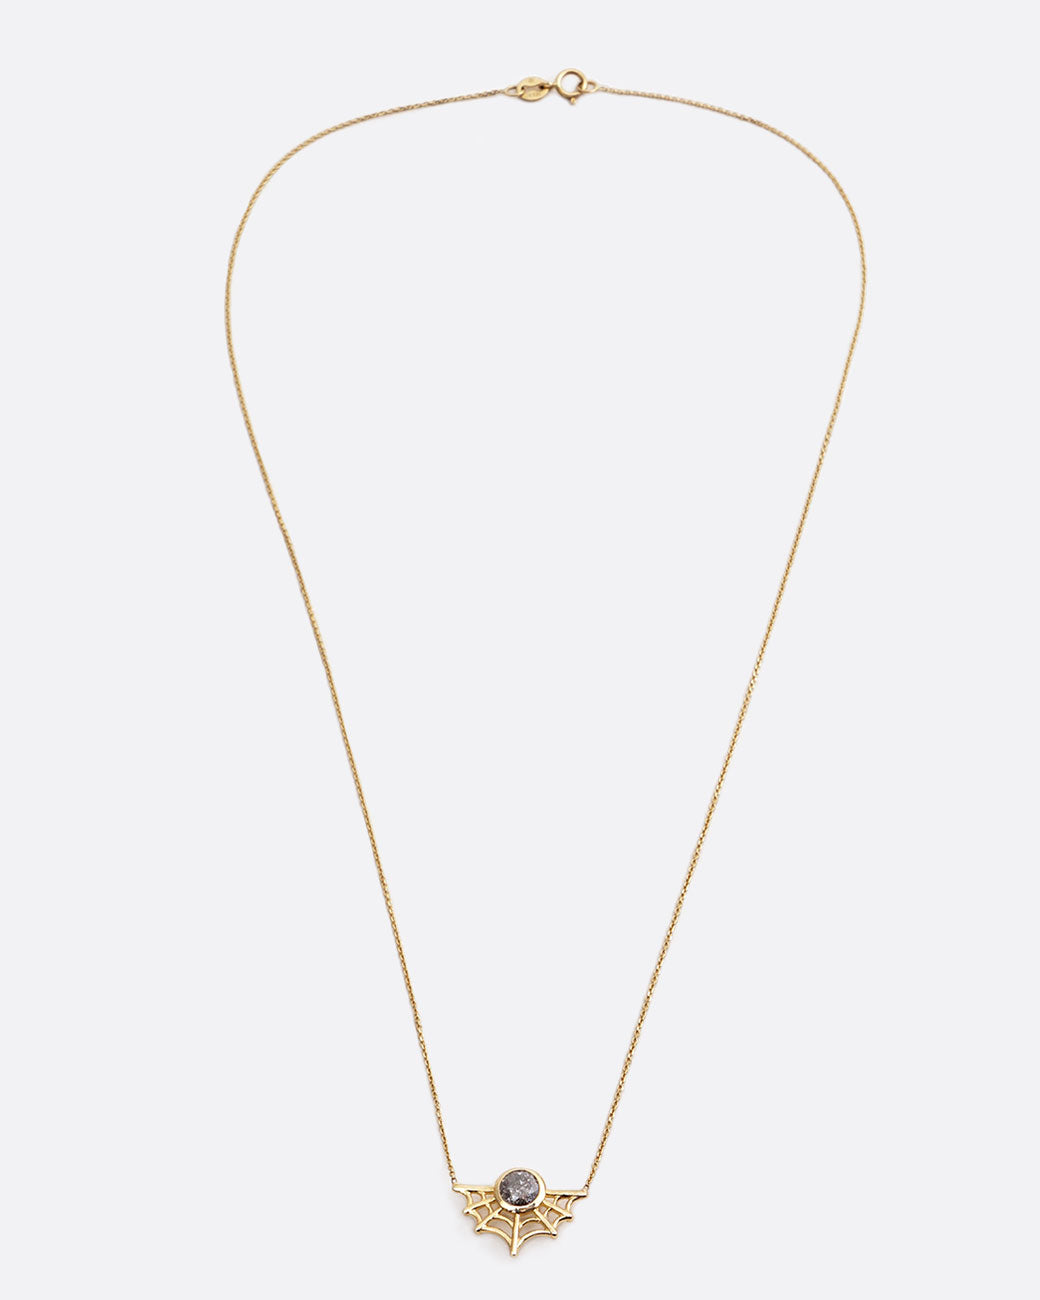 14k yellow gold spider web necklace with round salt and pepper diamond by Margaret Cross.